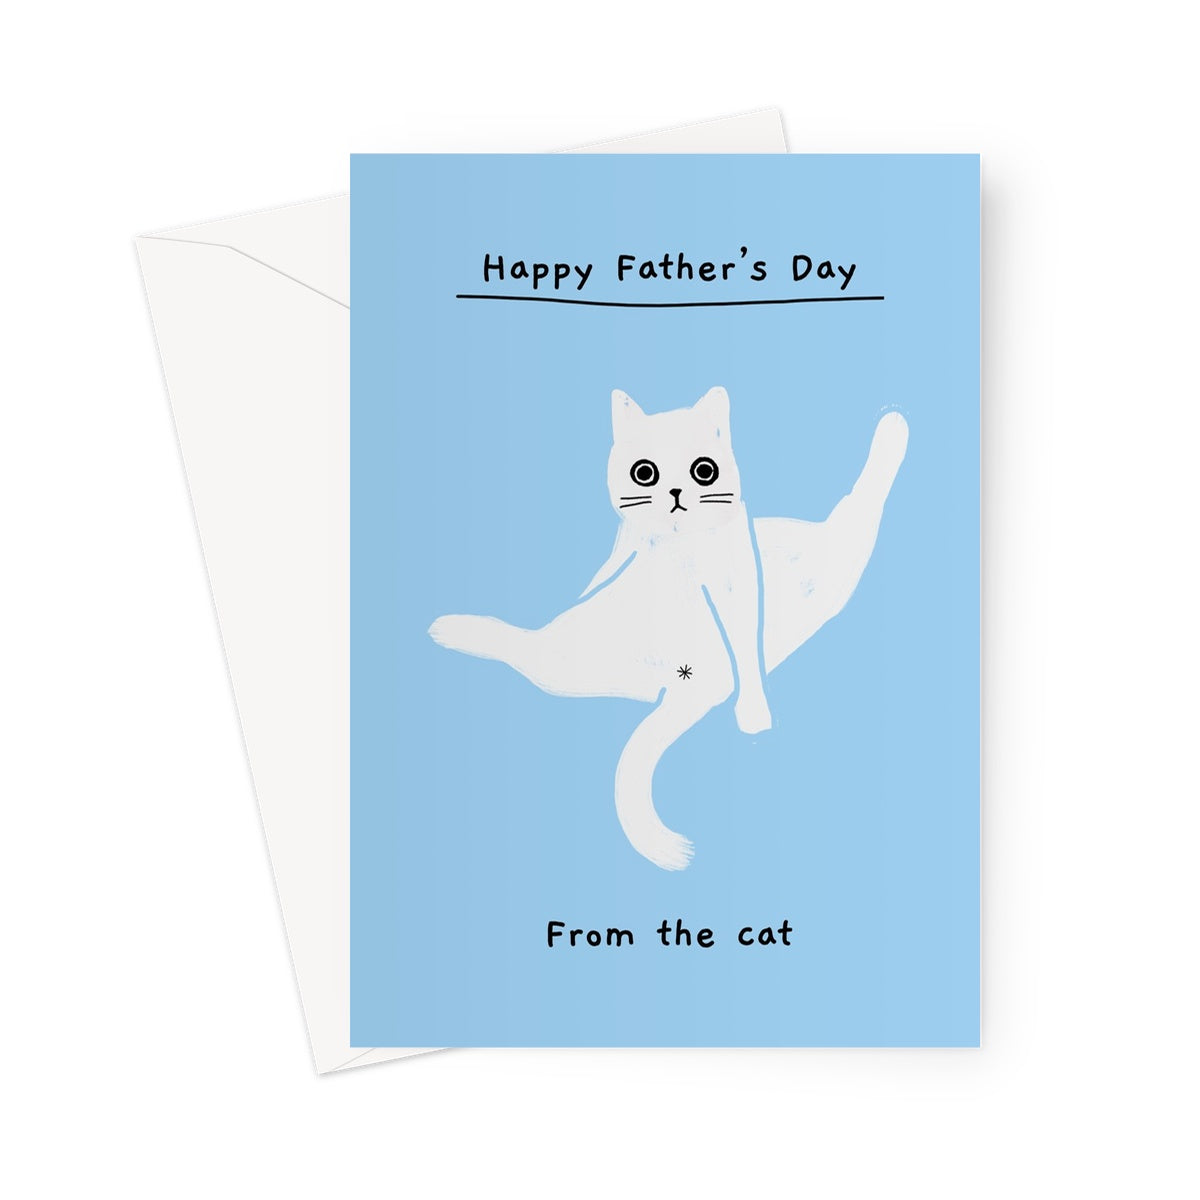 Ken the cat Father's Day card - Happy Father's Day From the Cat - Ken sitting sprawled with legs up on blue background